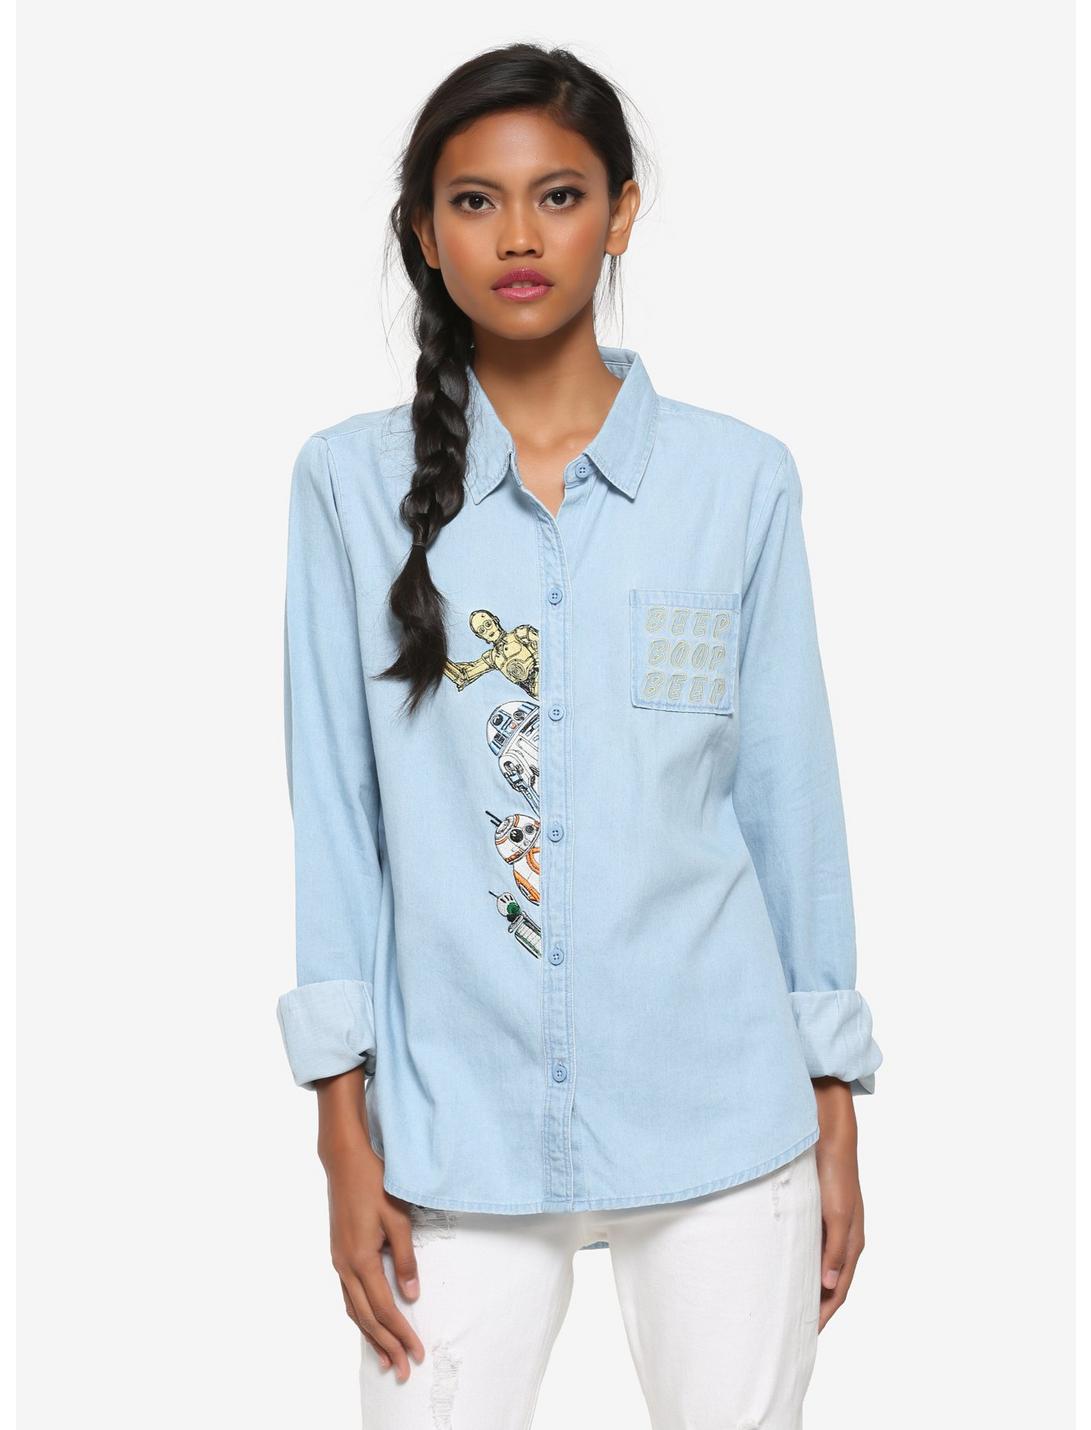 Our Universe Star Wars: The Rise of Skywalker Chambray Women's Woven Button-Up - BoxLunch Exclusive, BLUE, hi-res